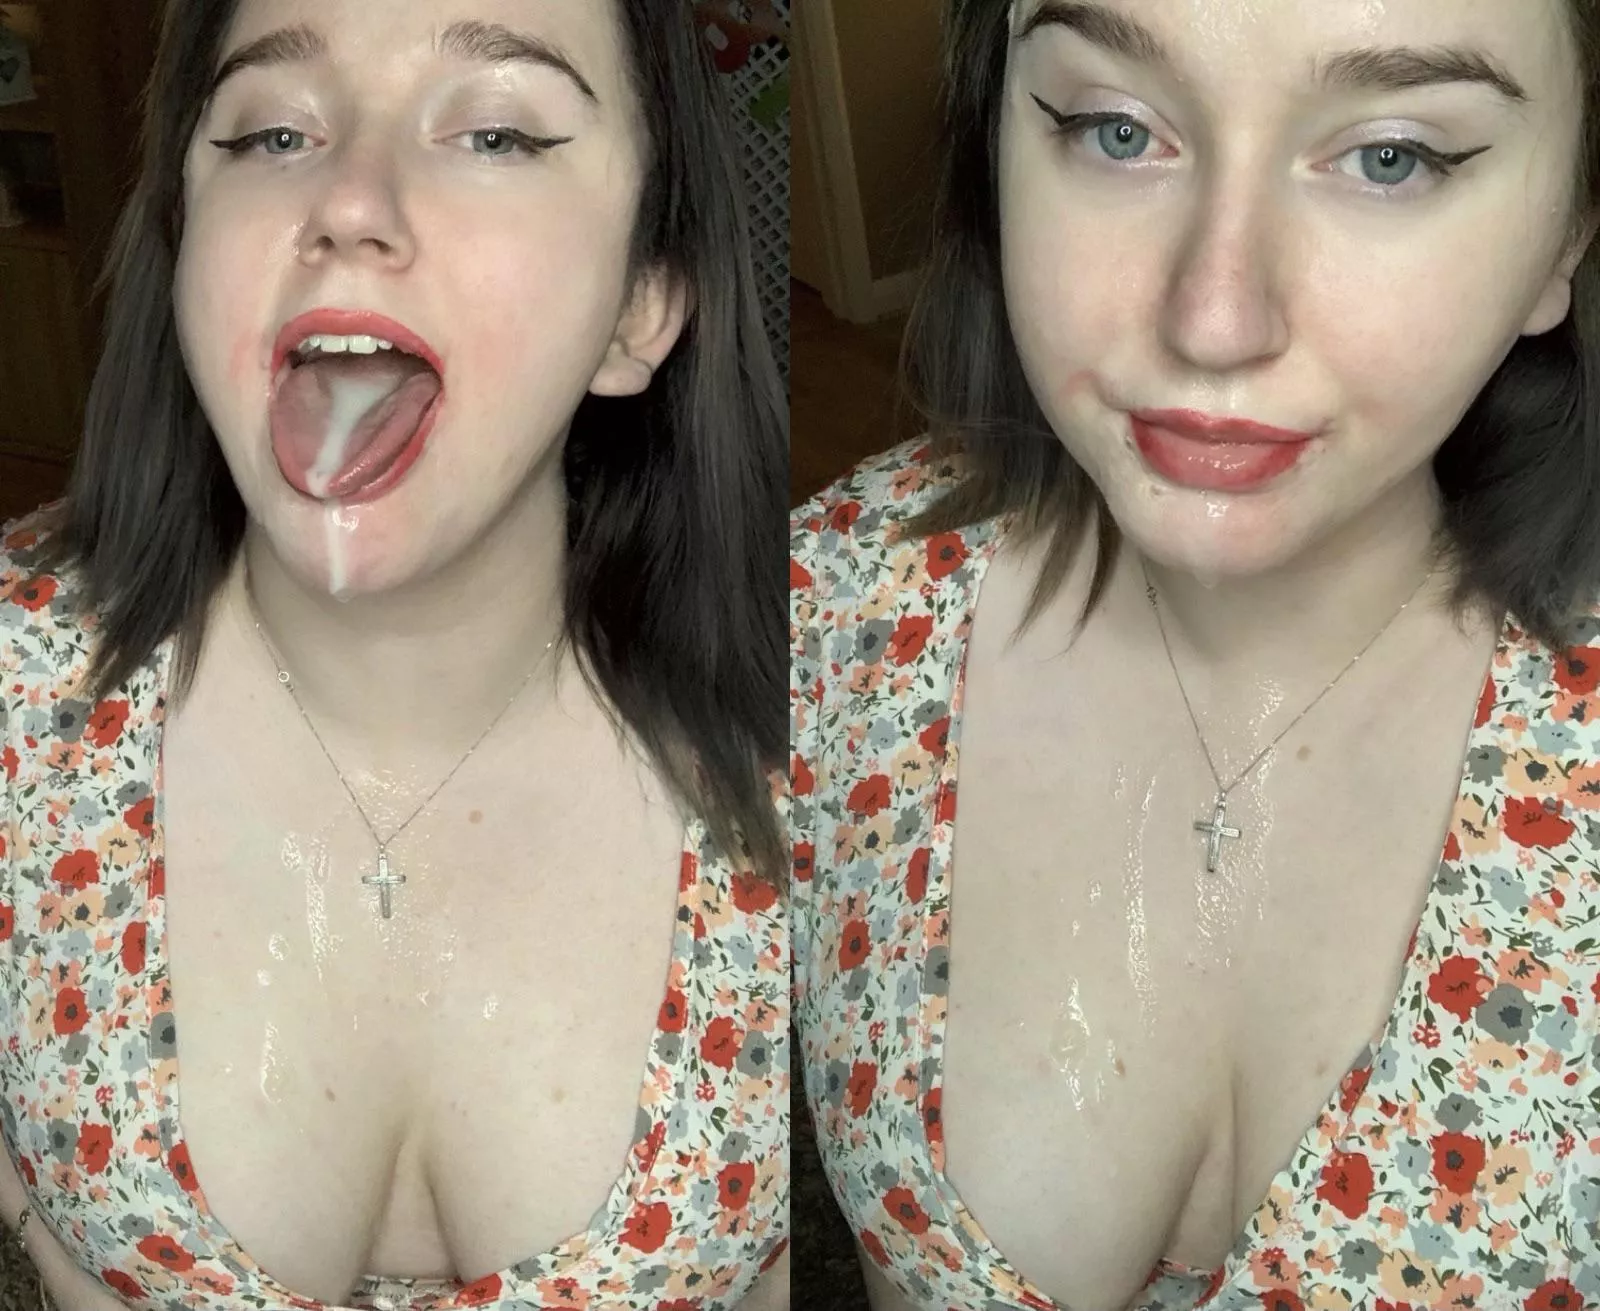 Good girls swallow nudes by urpisceswhore